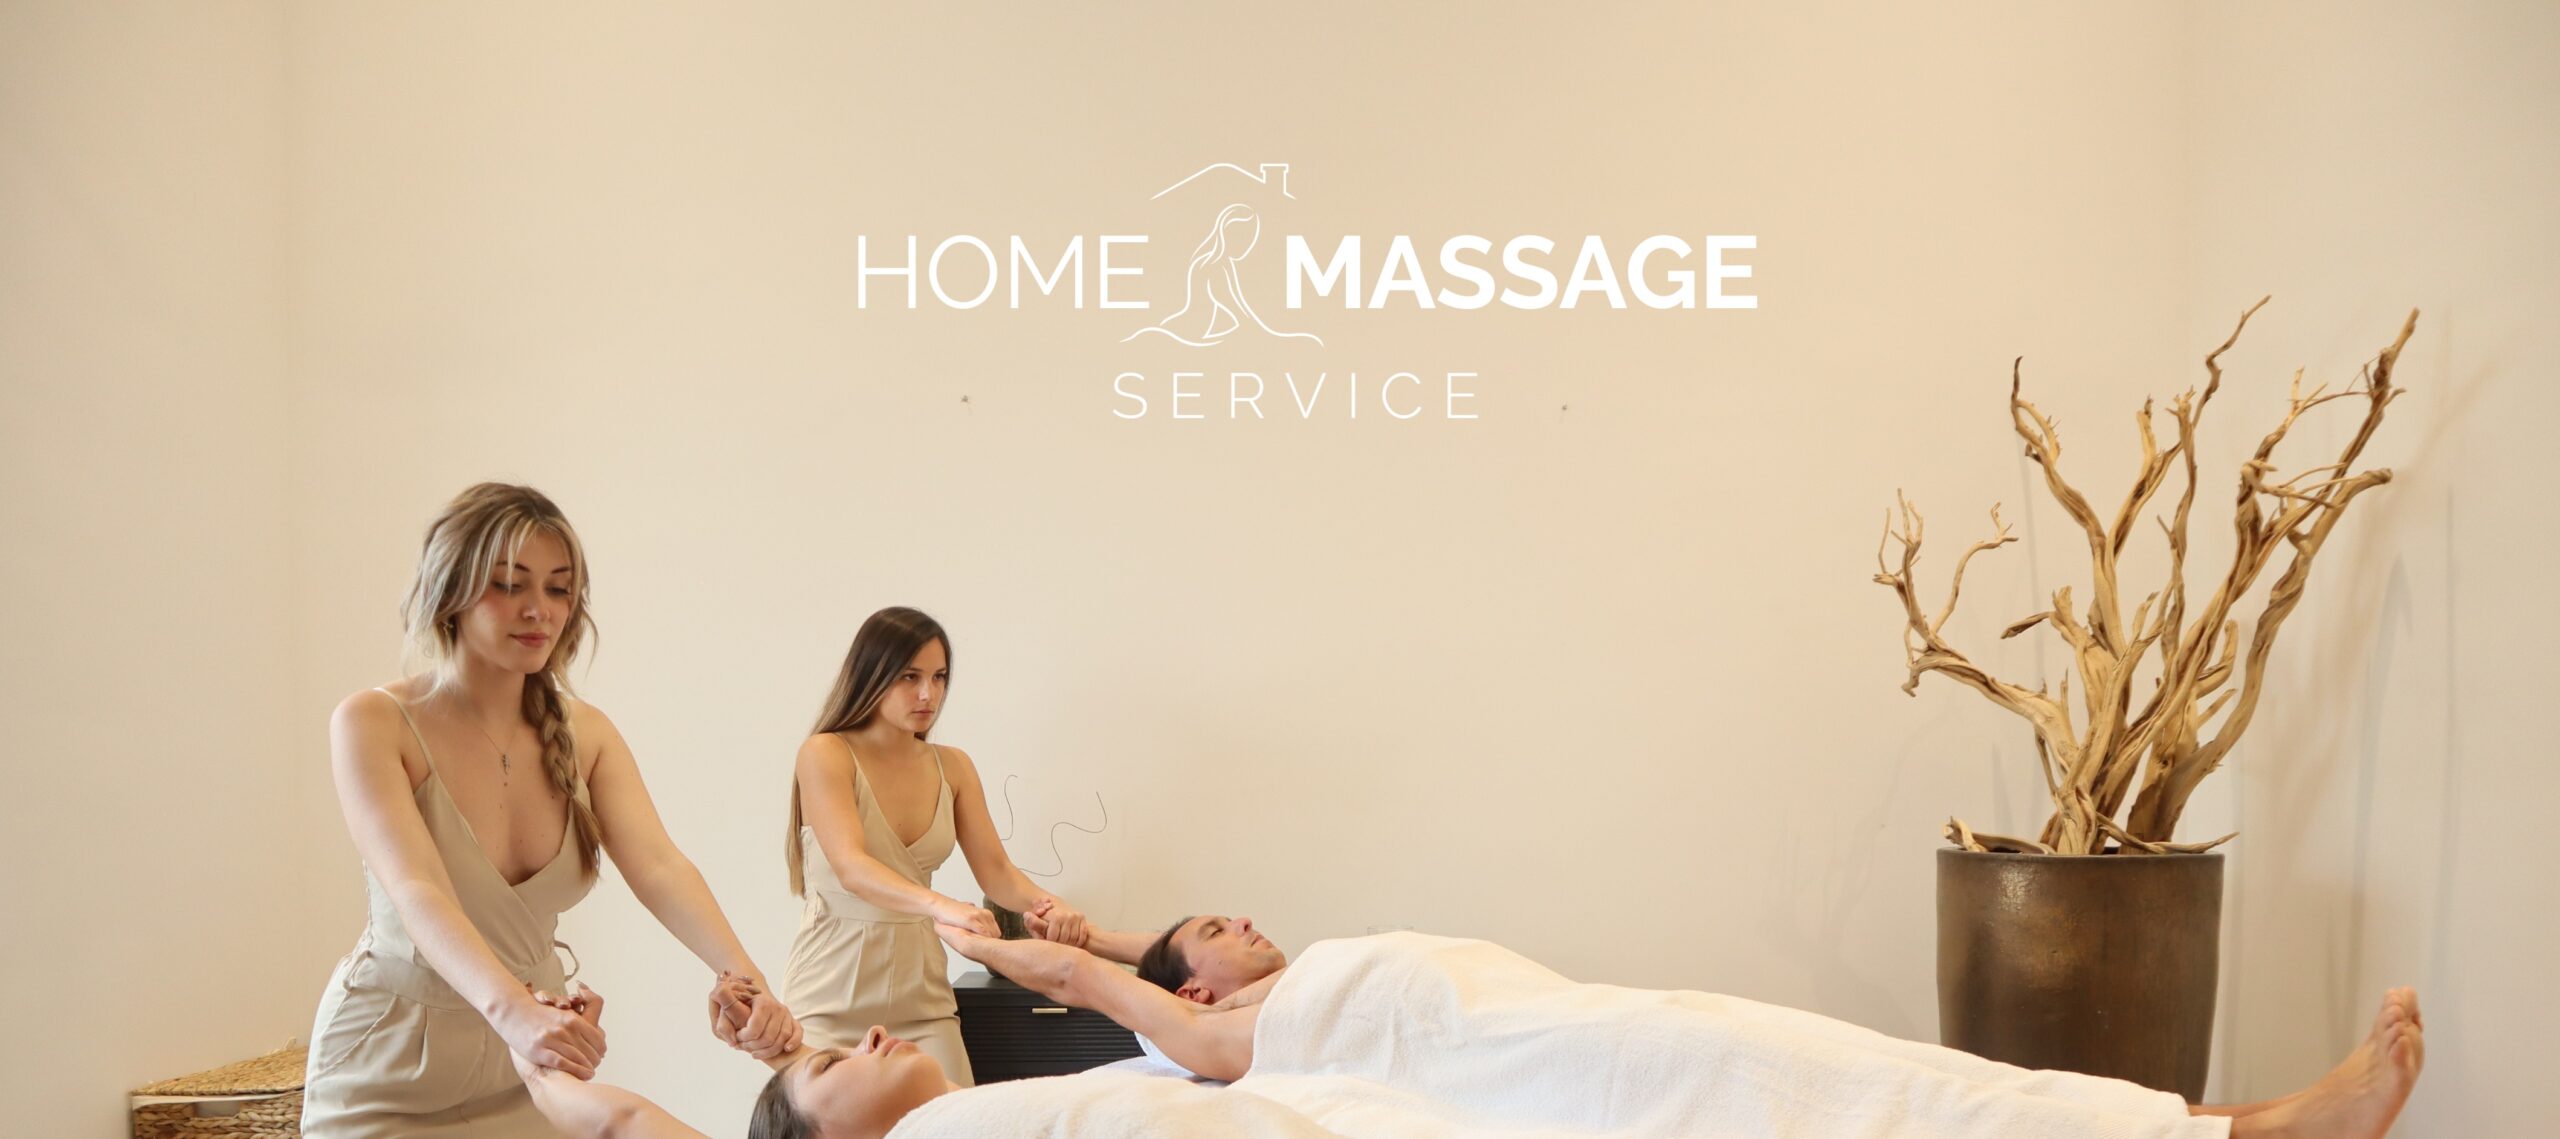 11Couples massage at home. 
Couples massage booking 
Offer couple massage at home
Best price simultaneous couple service